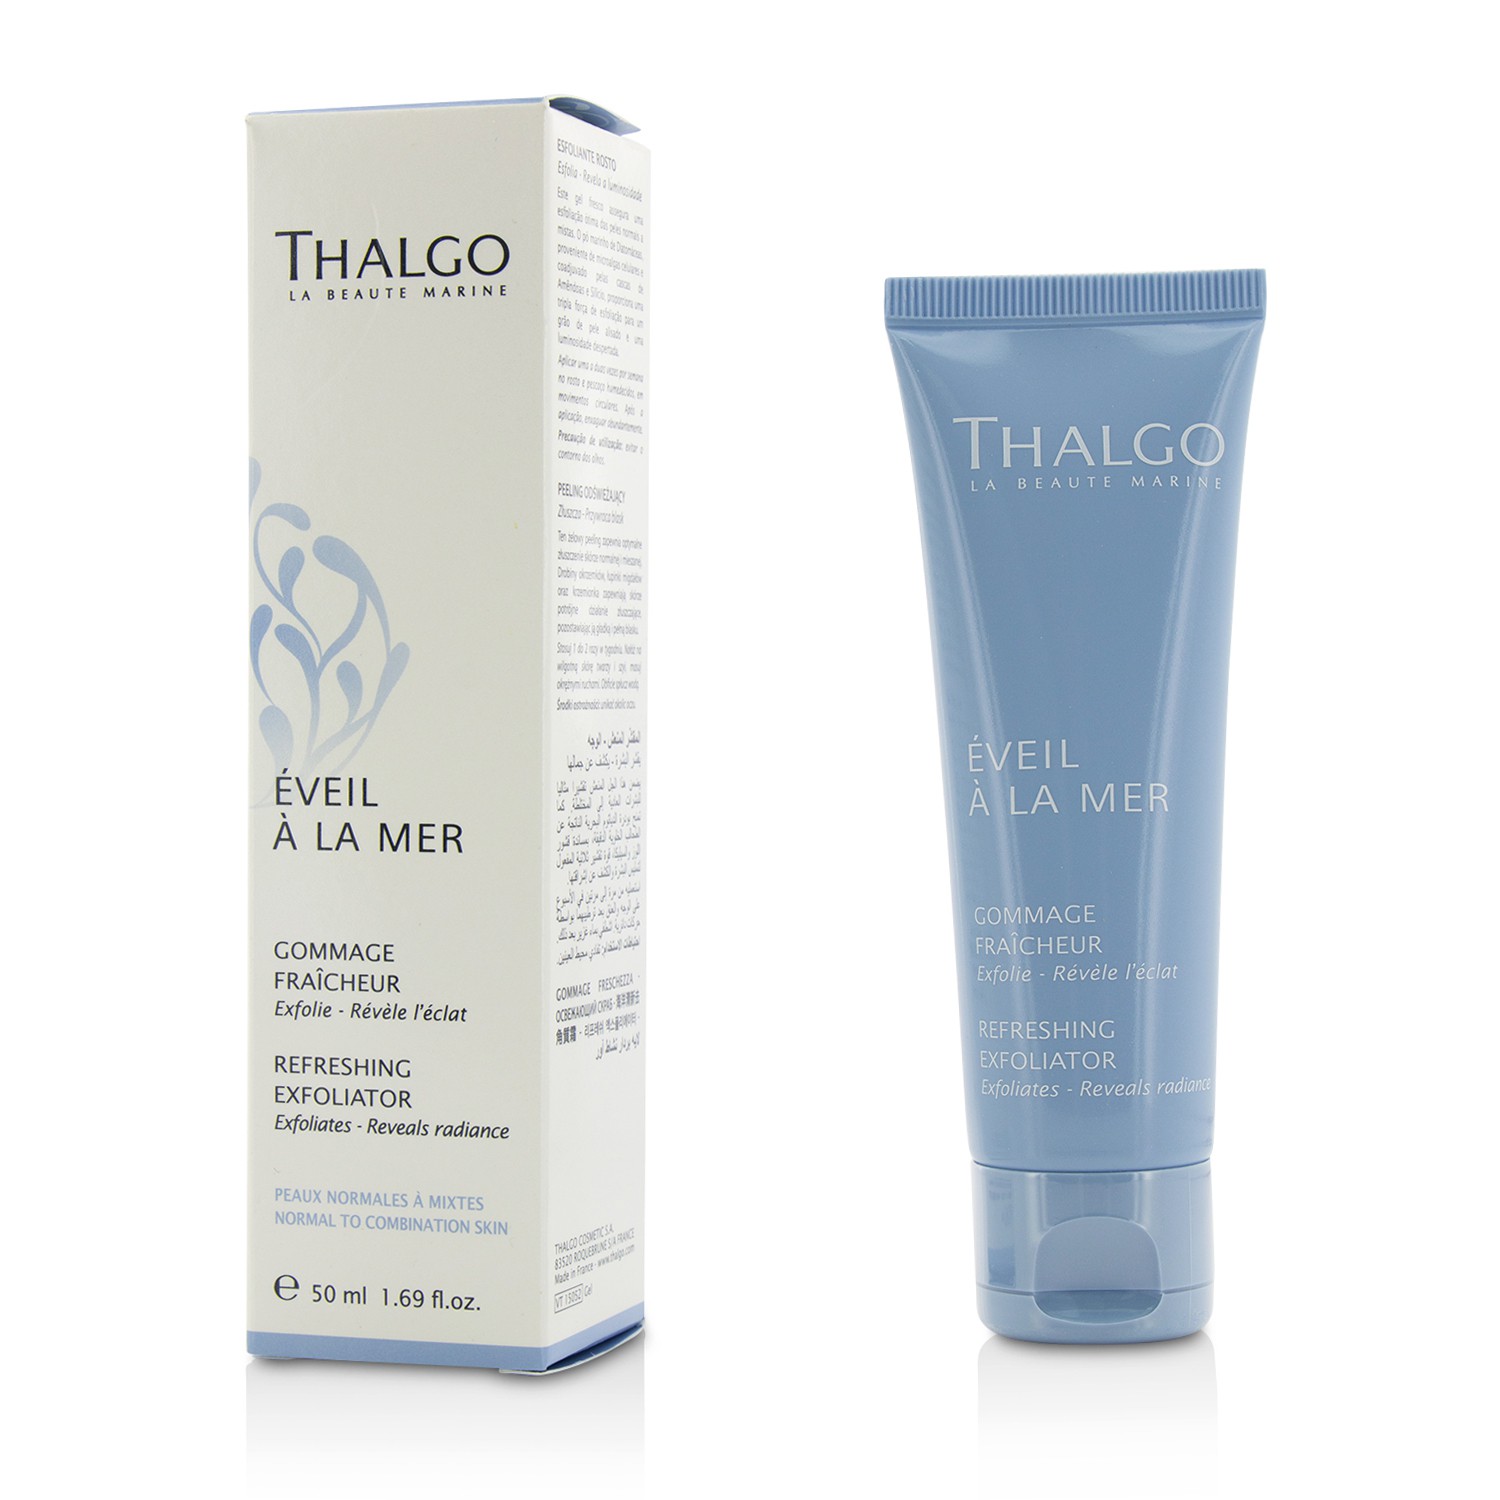 Eveil A La Mer Refreshing Exfoliator - For Normal to Combination Skin Thalgo Image